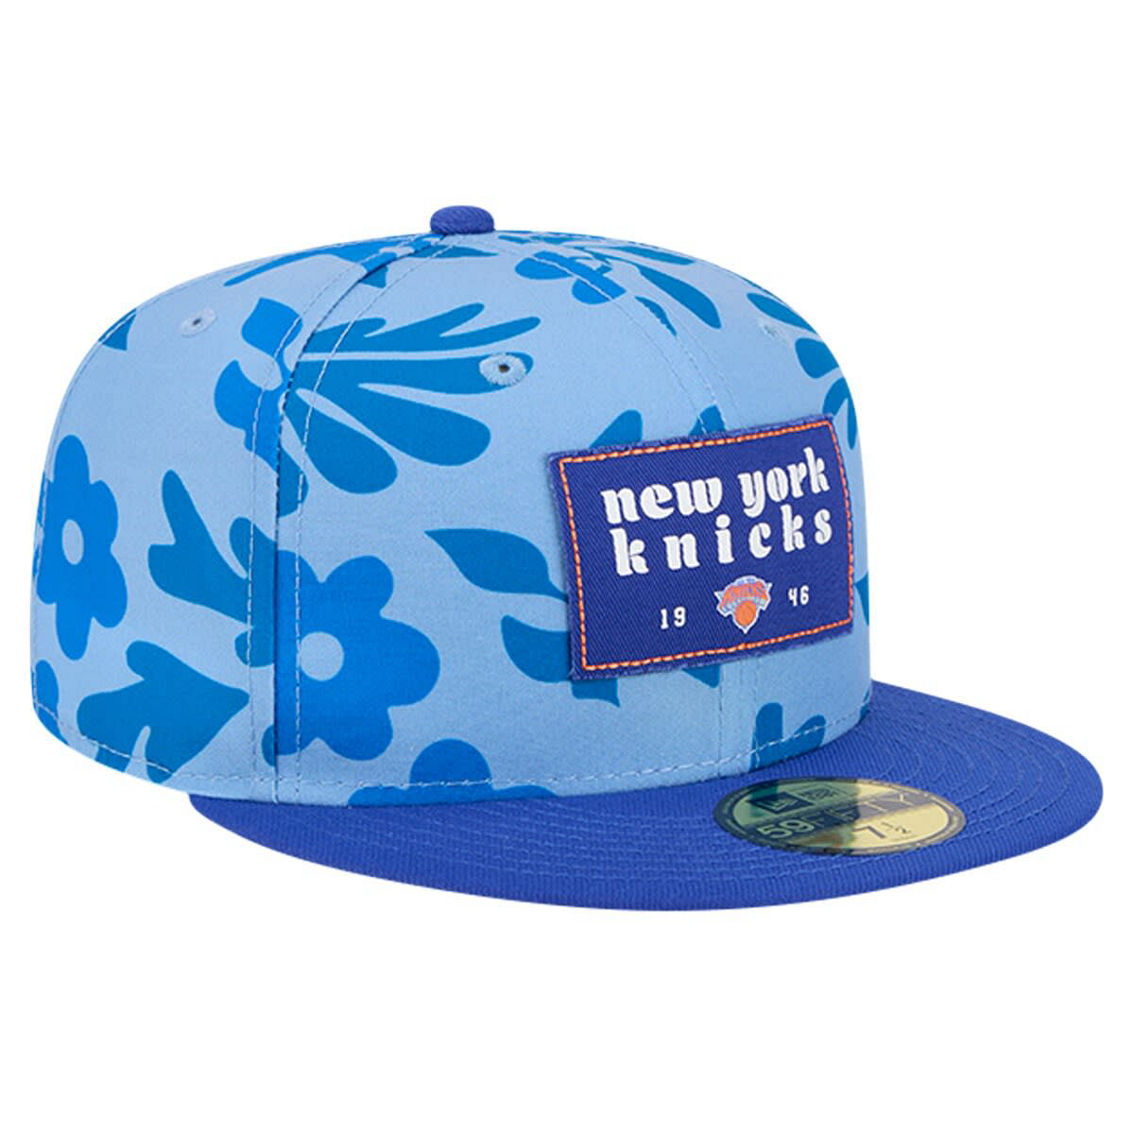 New Era Men's Blue New York Knicks Palm Fronds 2-Tone 59FIFTY Fitted Hat - Image 4 of 4